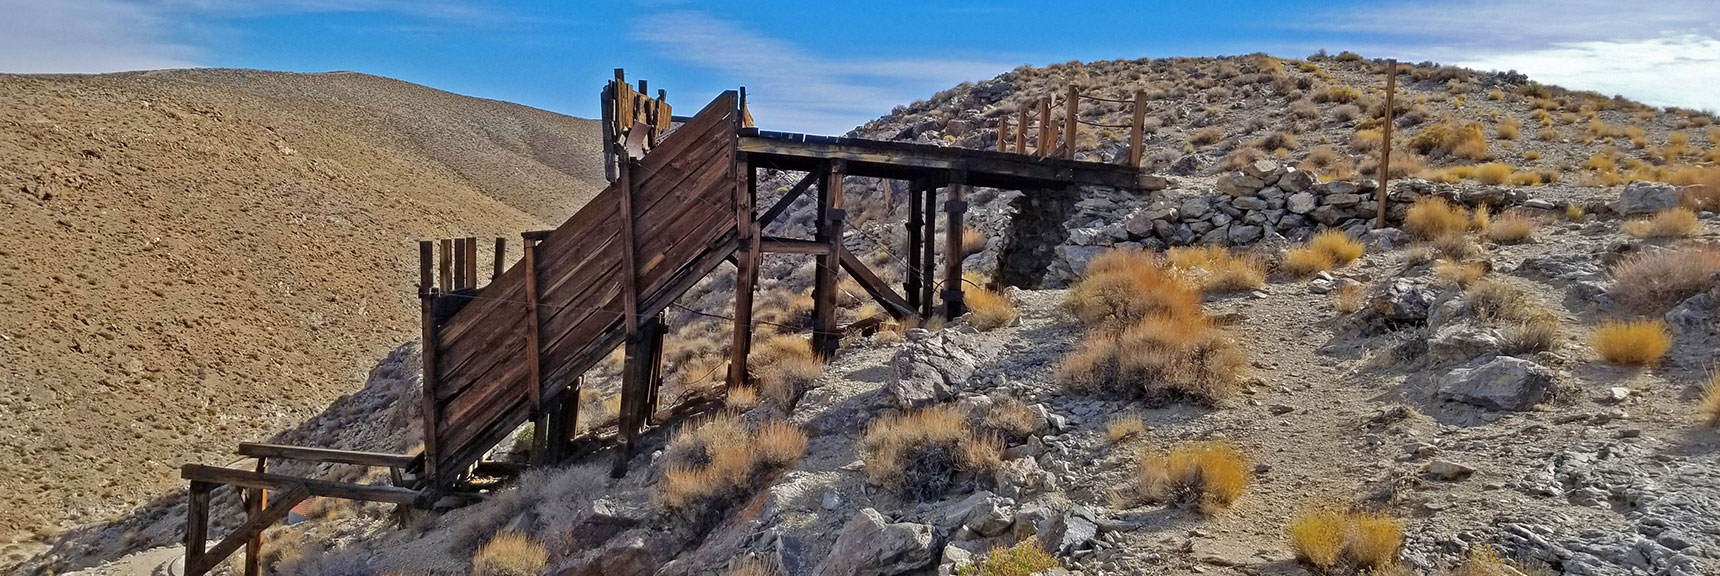 Upper Portion of Skidoo Stamp Mill | Skidoo Stamp Mill, Panamint Mountains, Death Valley National Park, CA